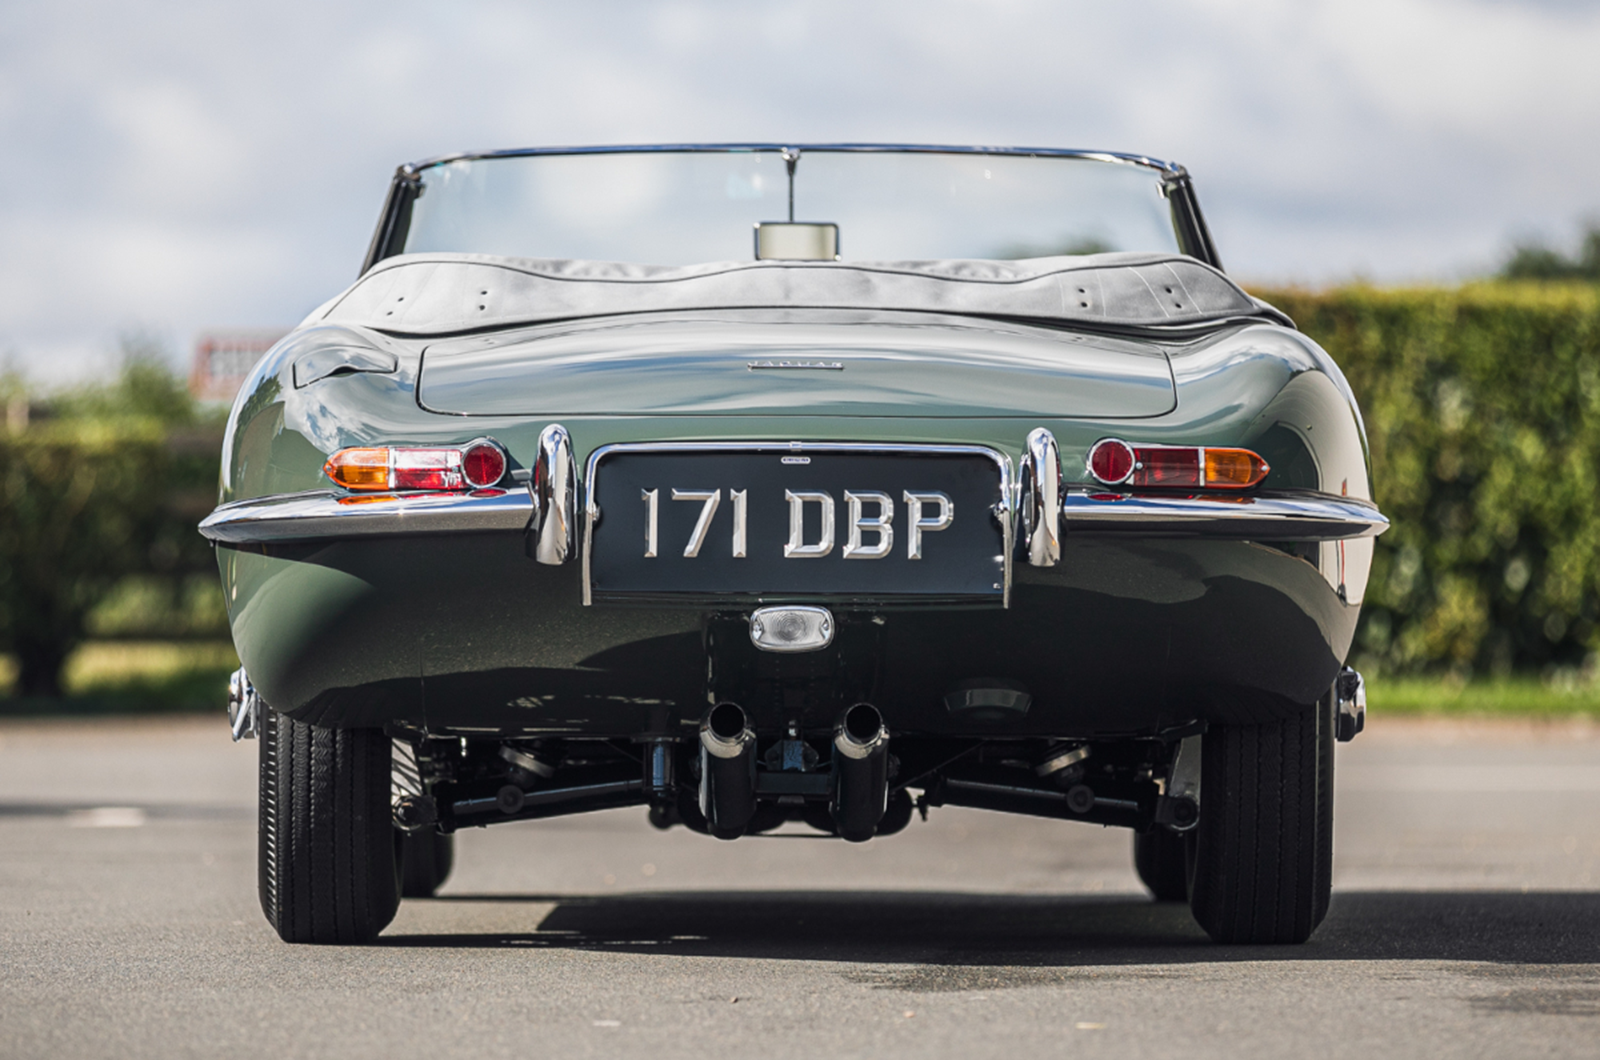 Classic & Sports Car – Aha! Want to own Steve Coogan’s super-early E-type?